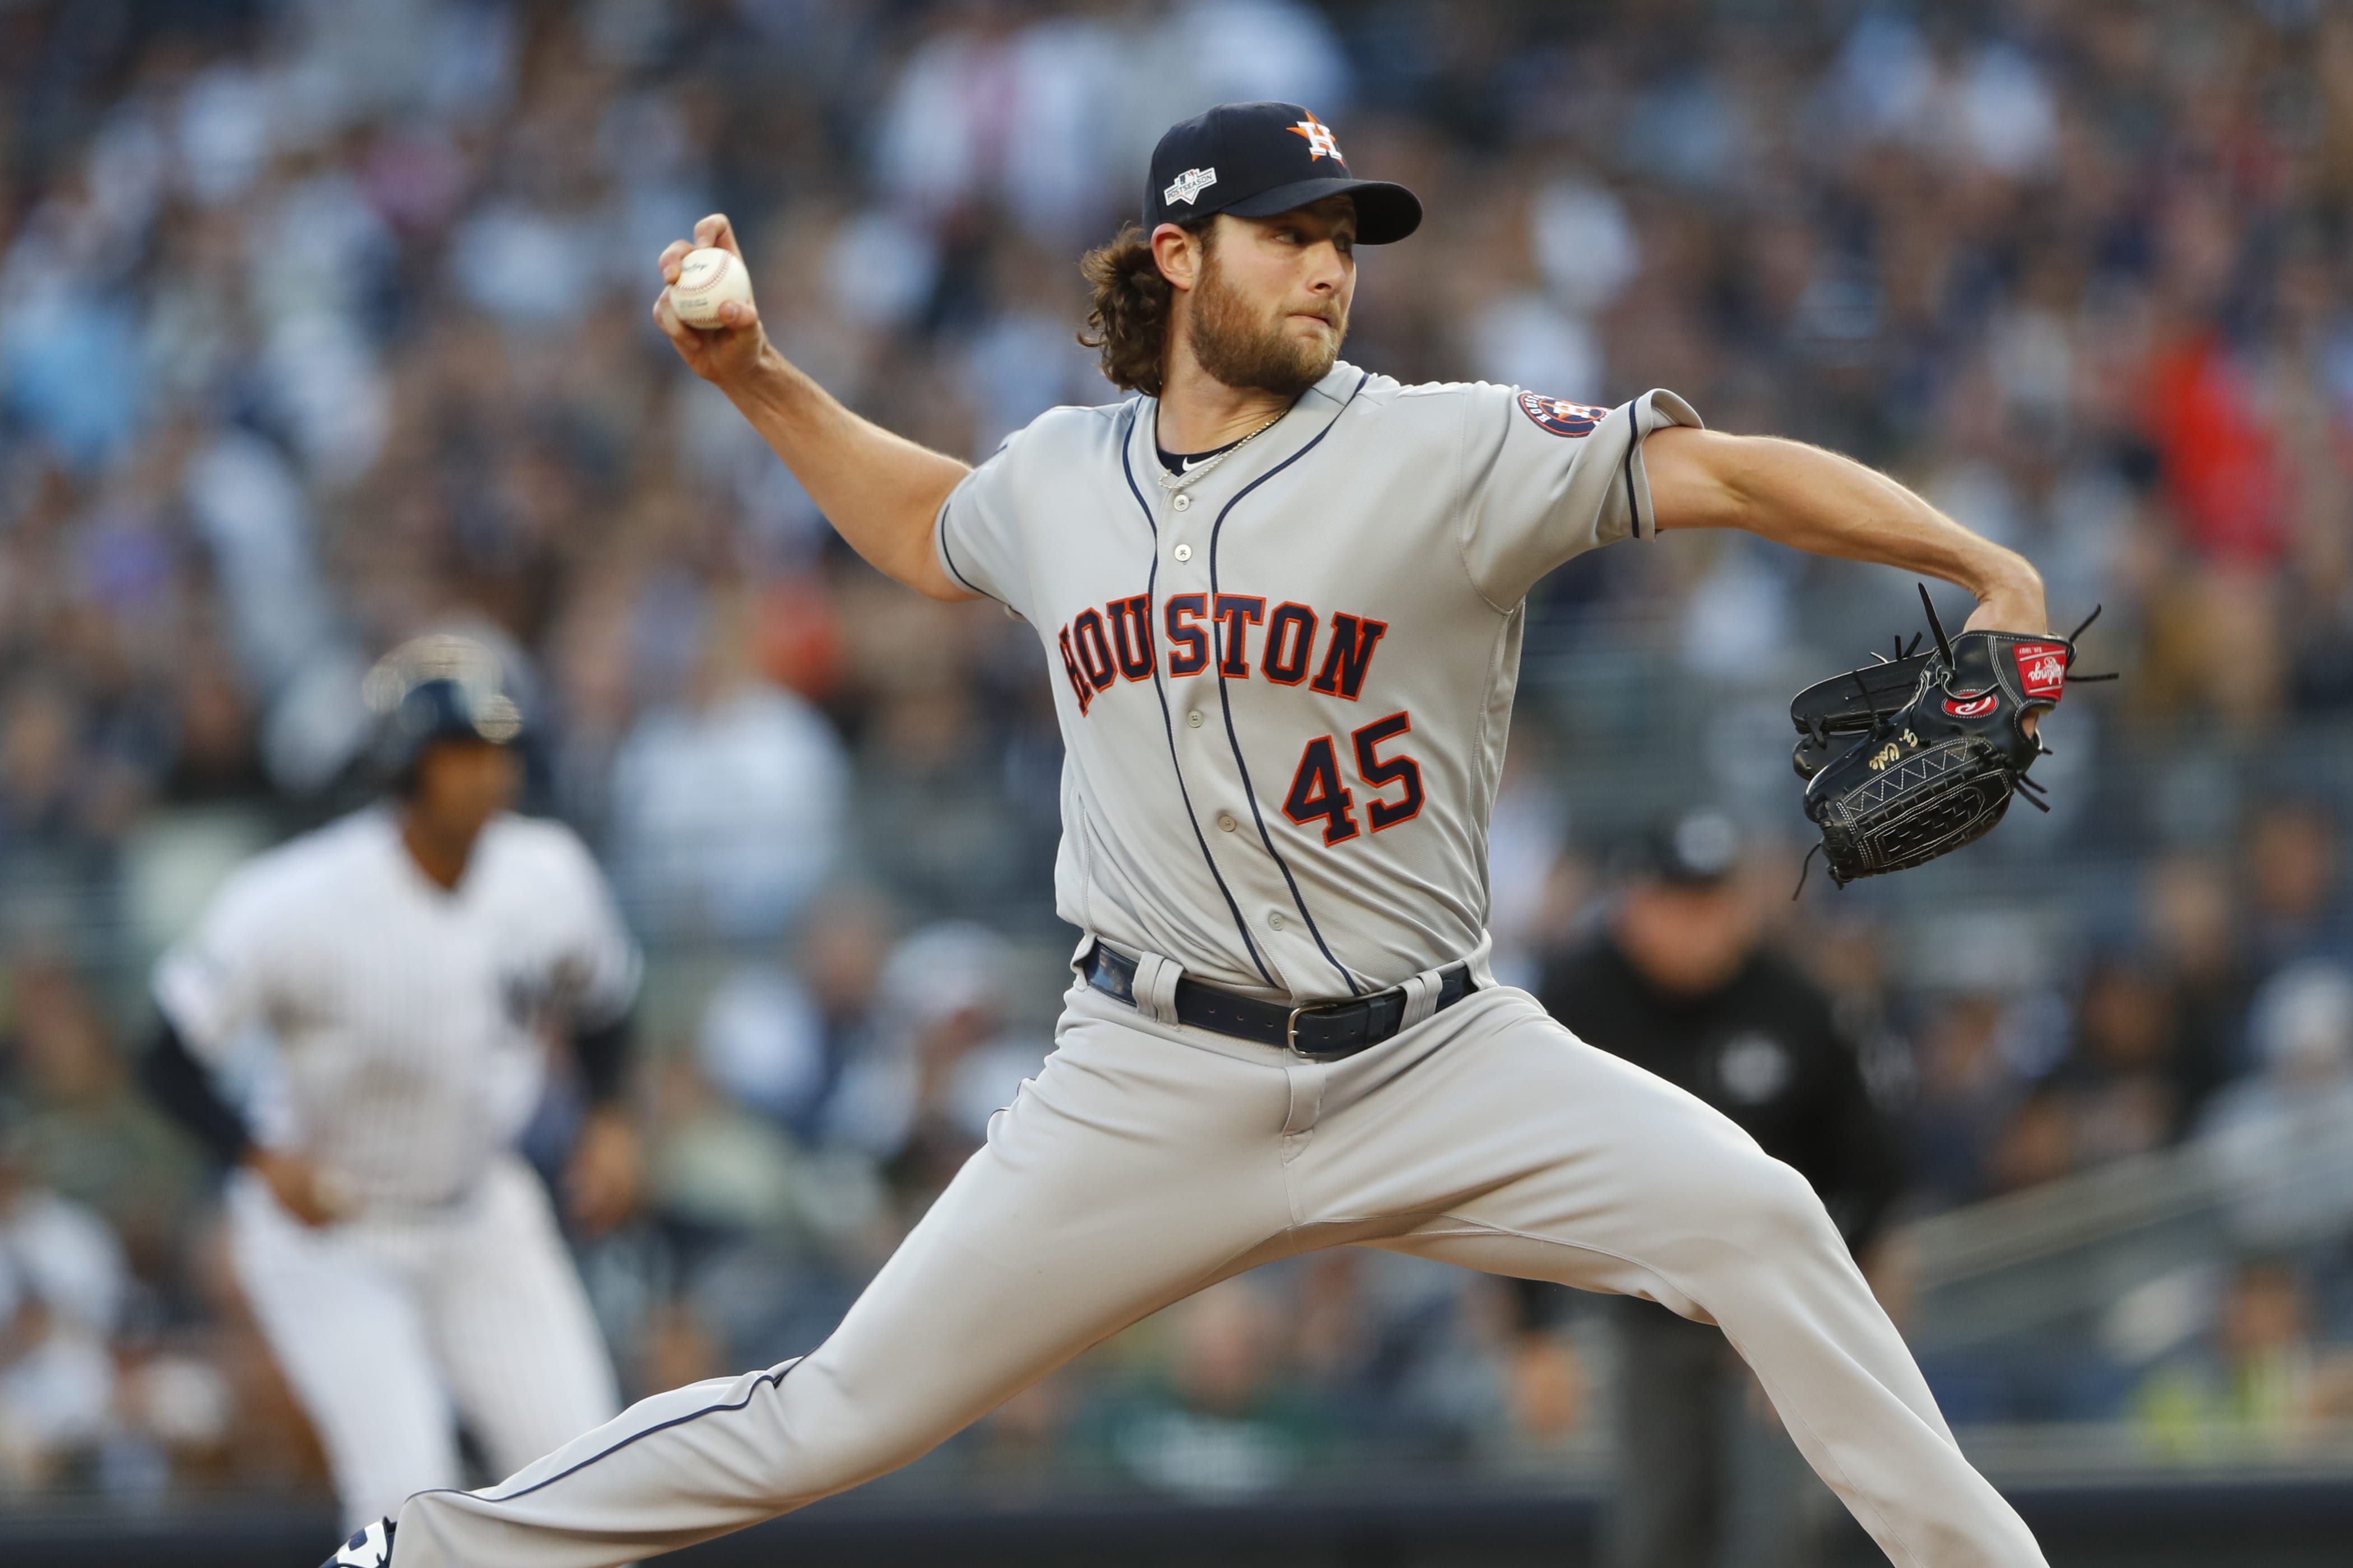 New York Yankees unload massive initial offer to Gerrit Cole